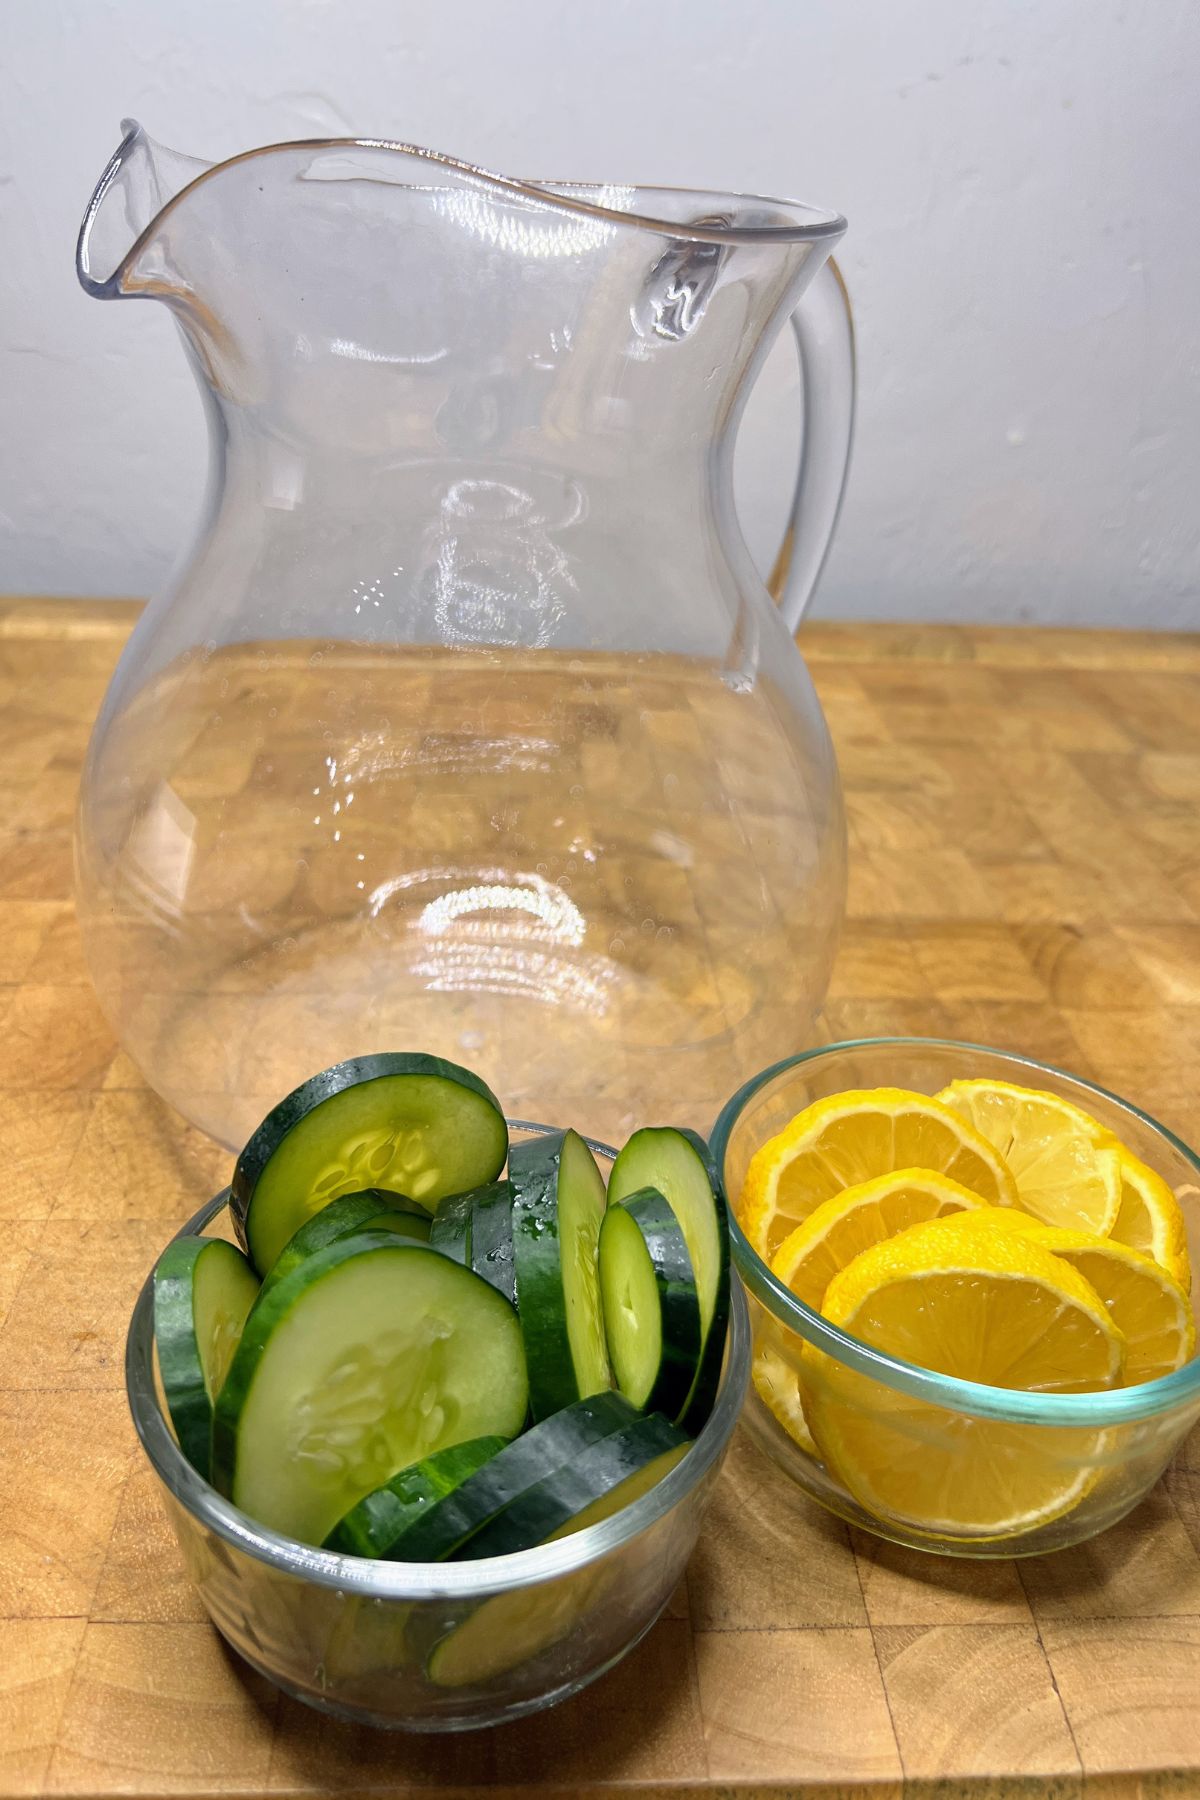 Pitcher behind bowls of sliced cucumber and lemons.